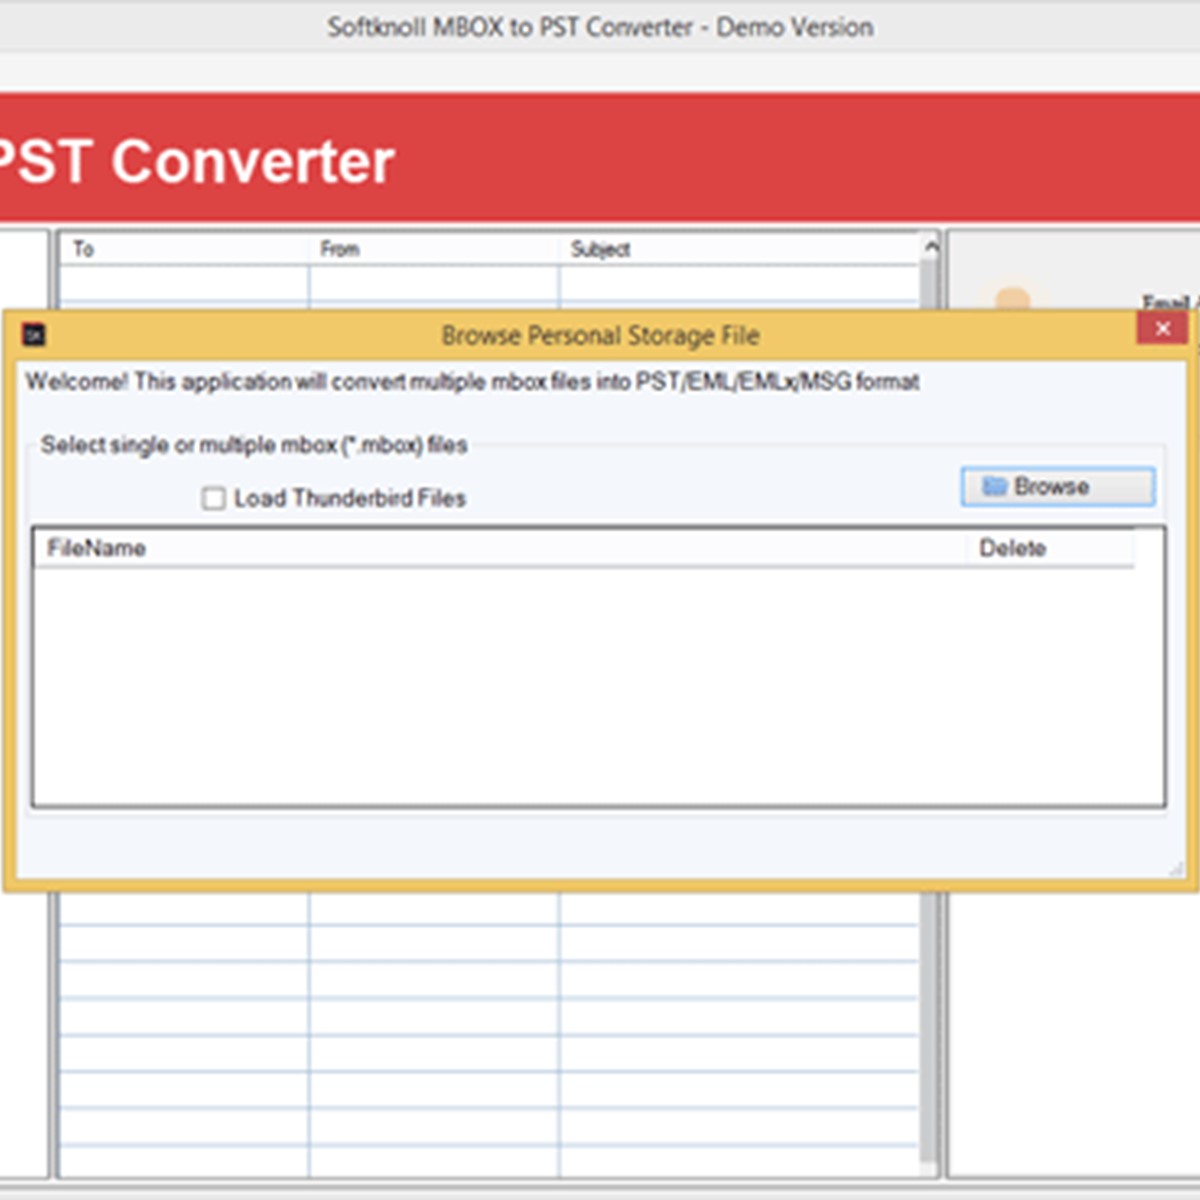 pst to mbox converter open source windows